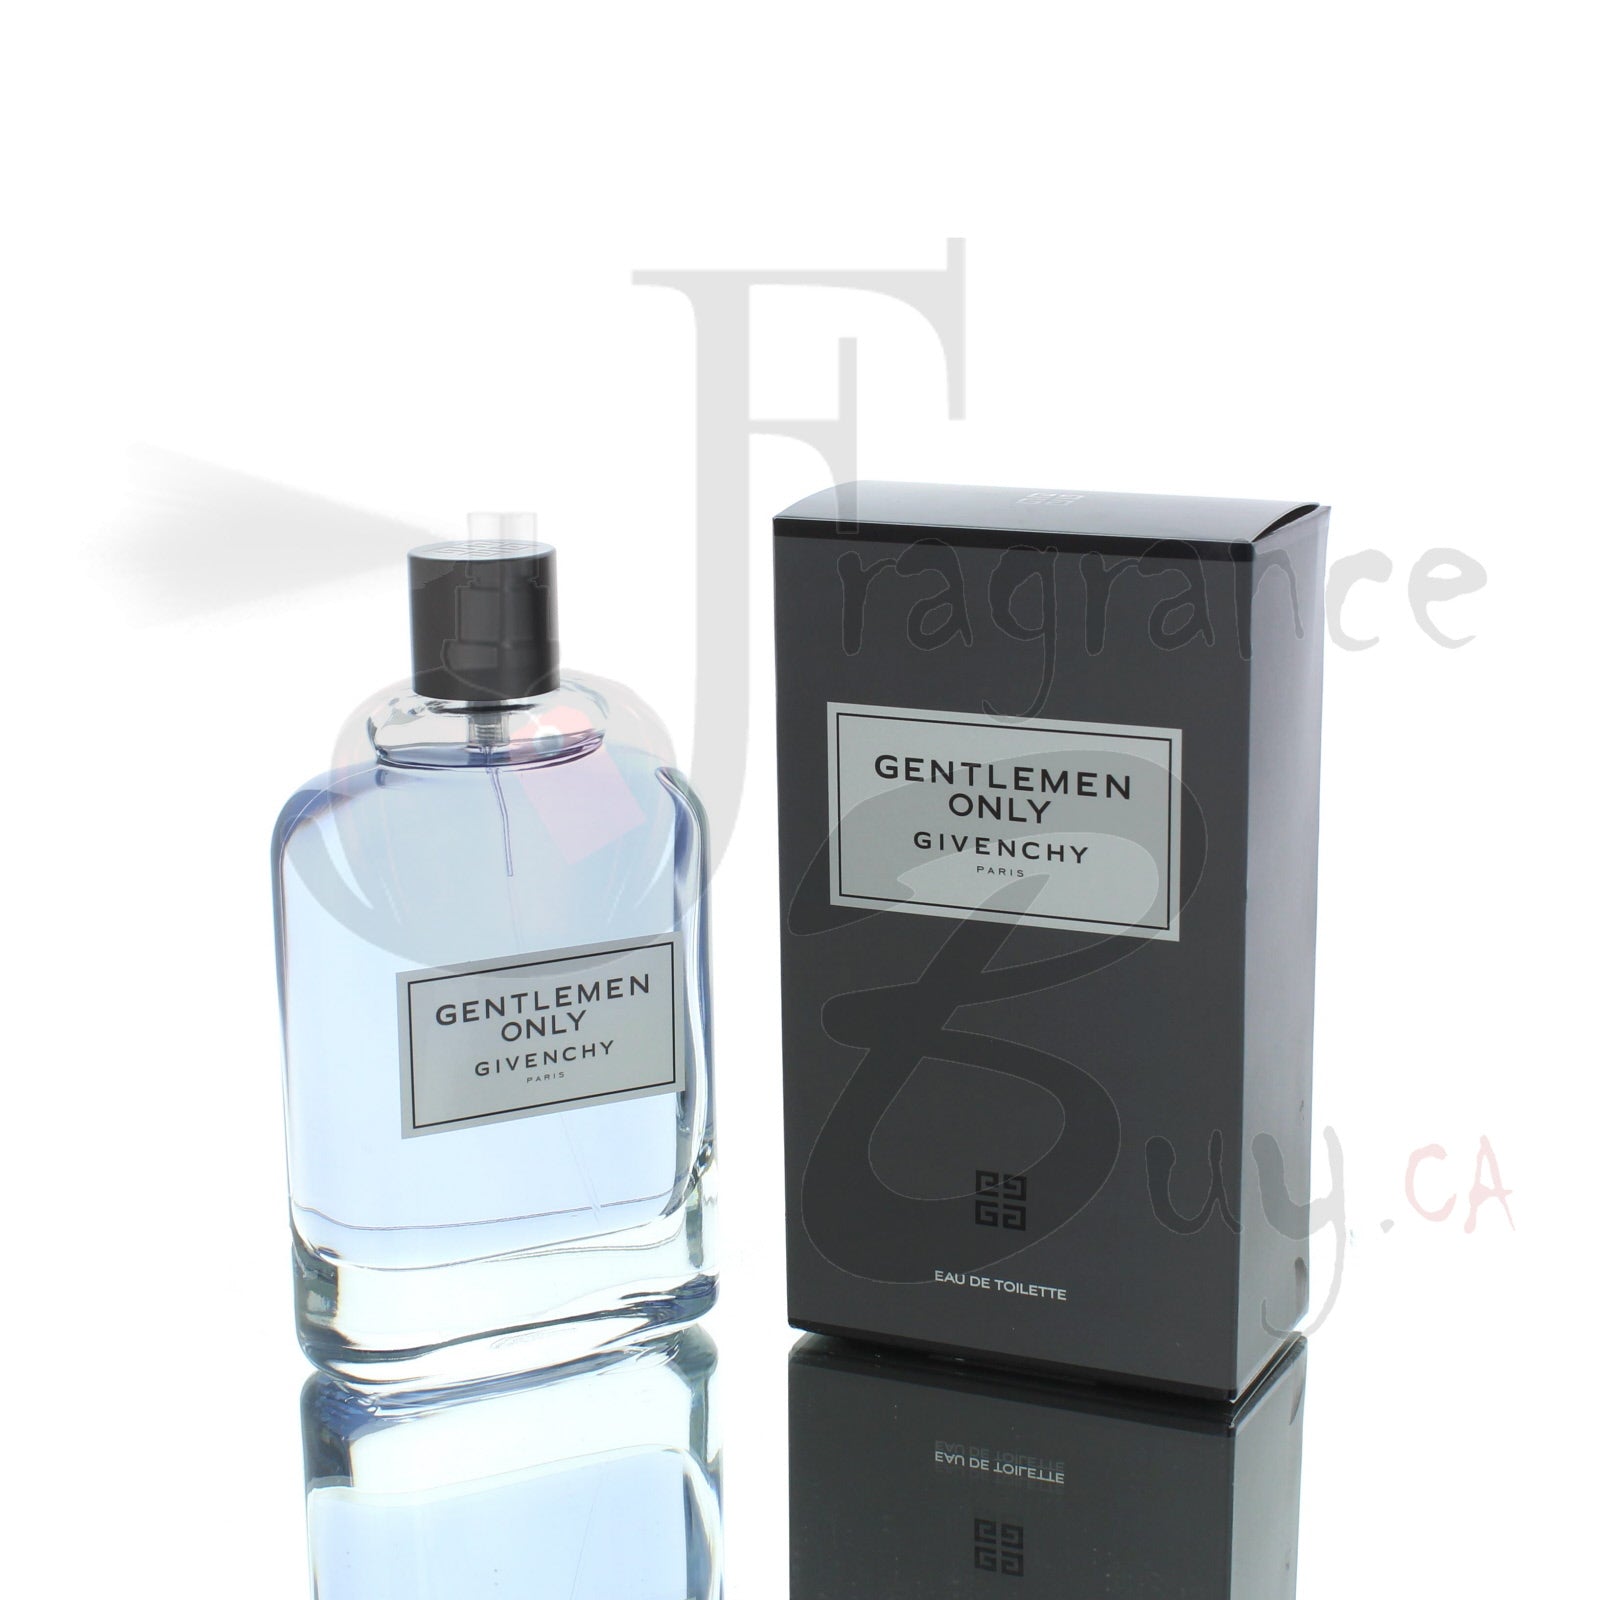 givenchy gentleman for men